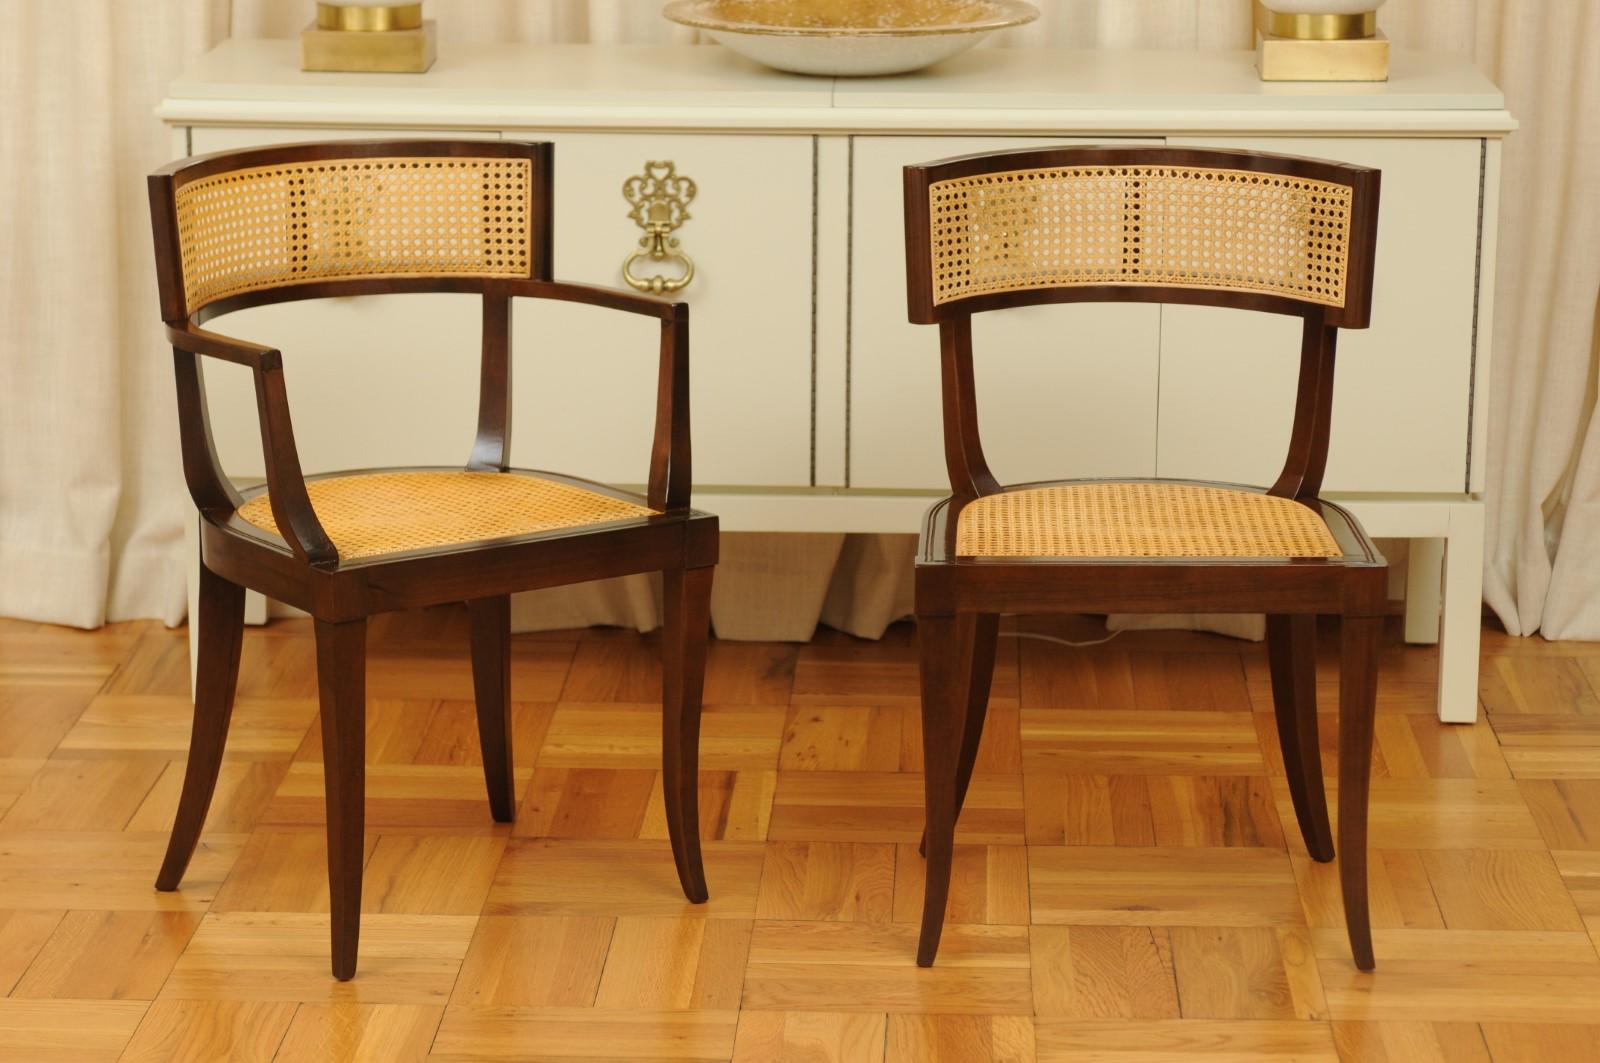 These magnificent dining chairs are shipped as professionally photographed and described in the listing narrative: Meticulously professionally restored and installation ready. Expert custom upholstery service is available.

The rarest of the rare,